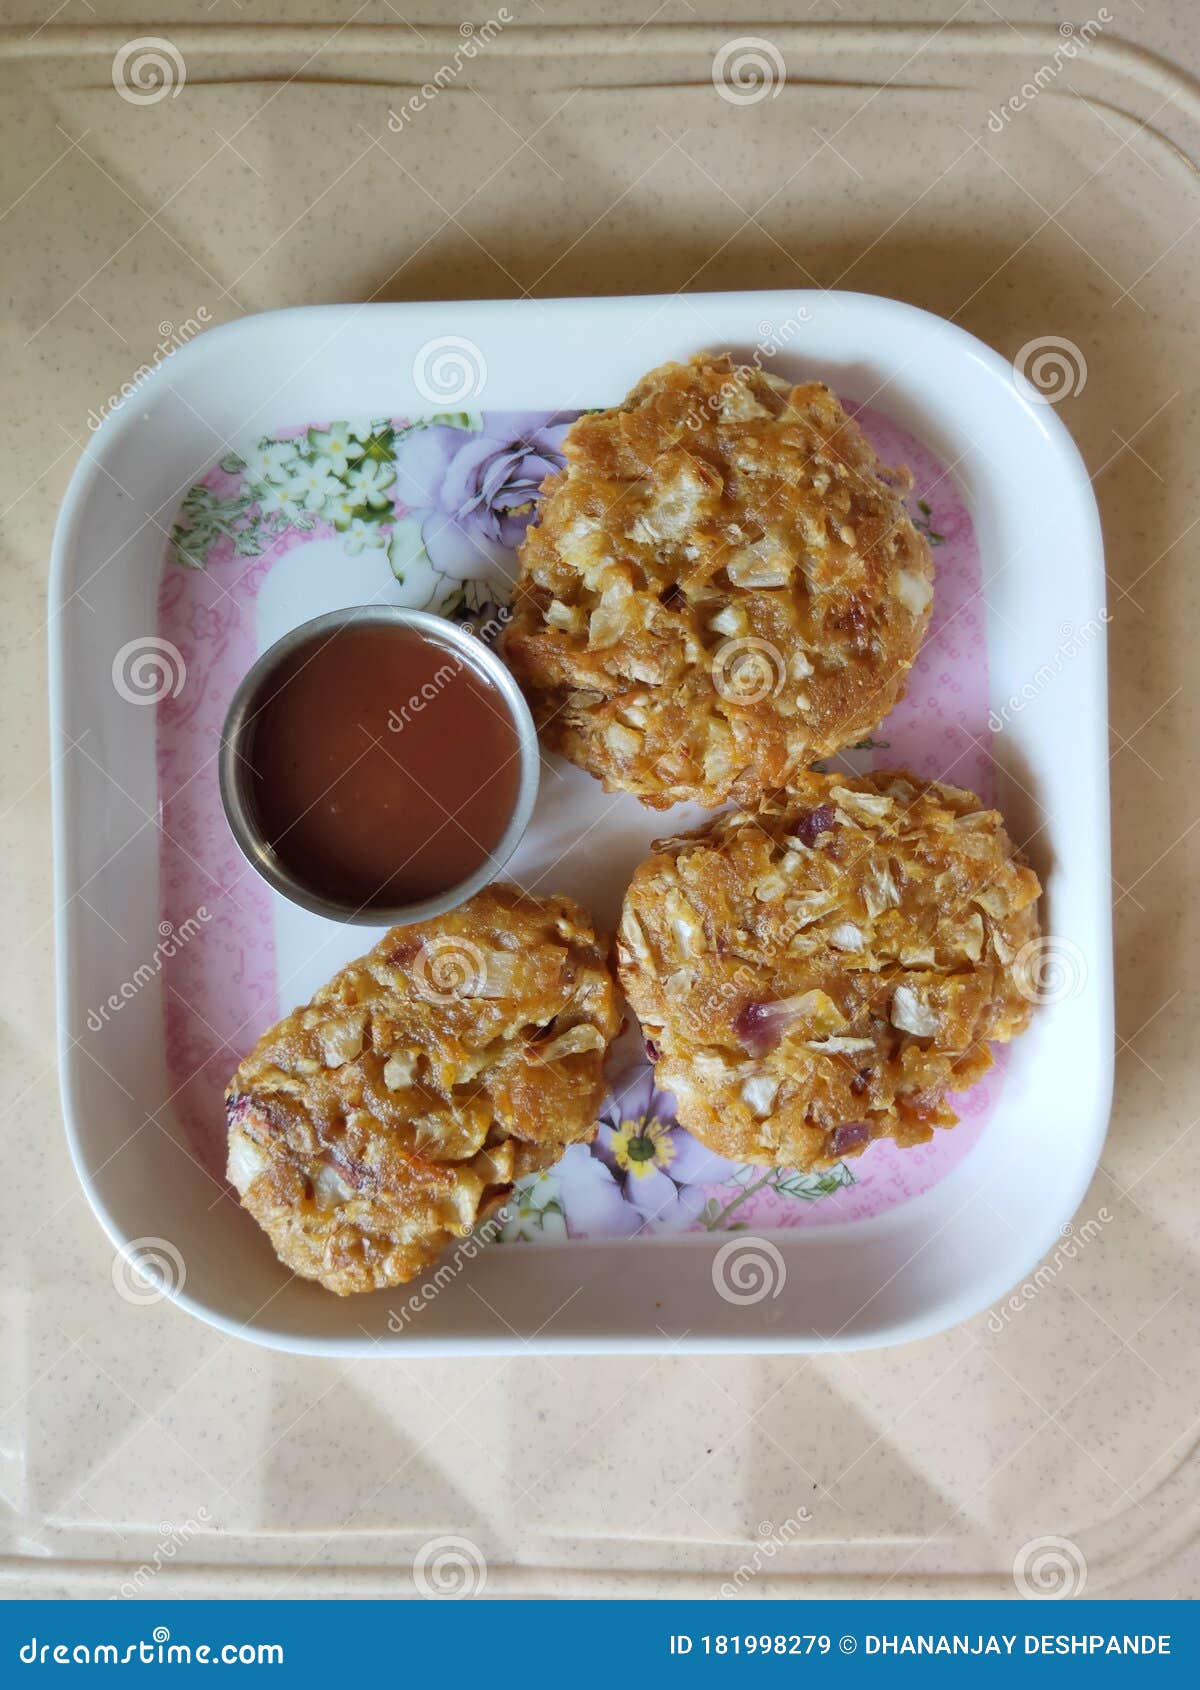 veg cutlets in a plate. cabbage cutlets receipe served in a plate. indian receipe veg cutlet close up view.